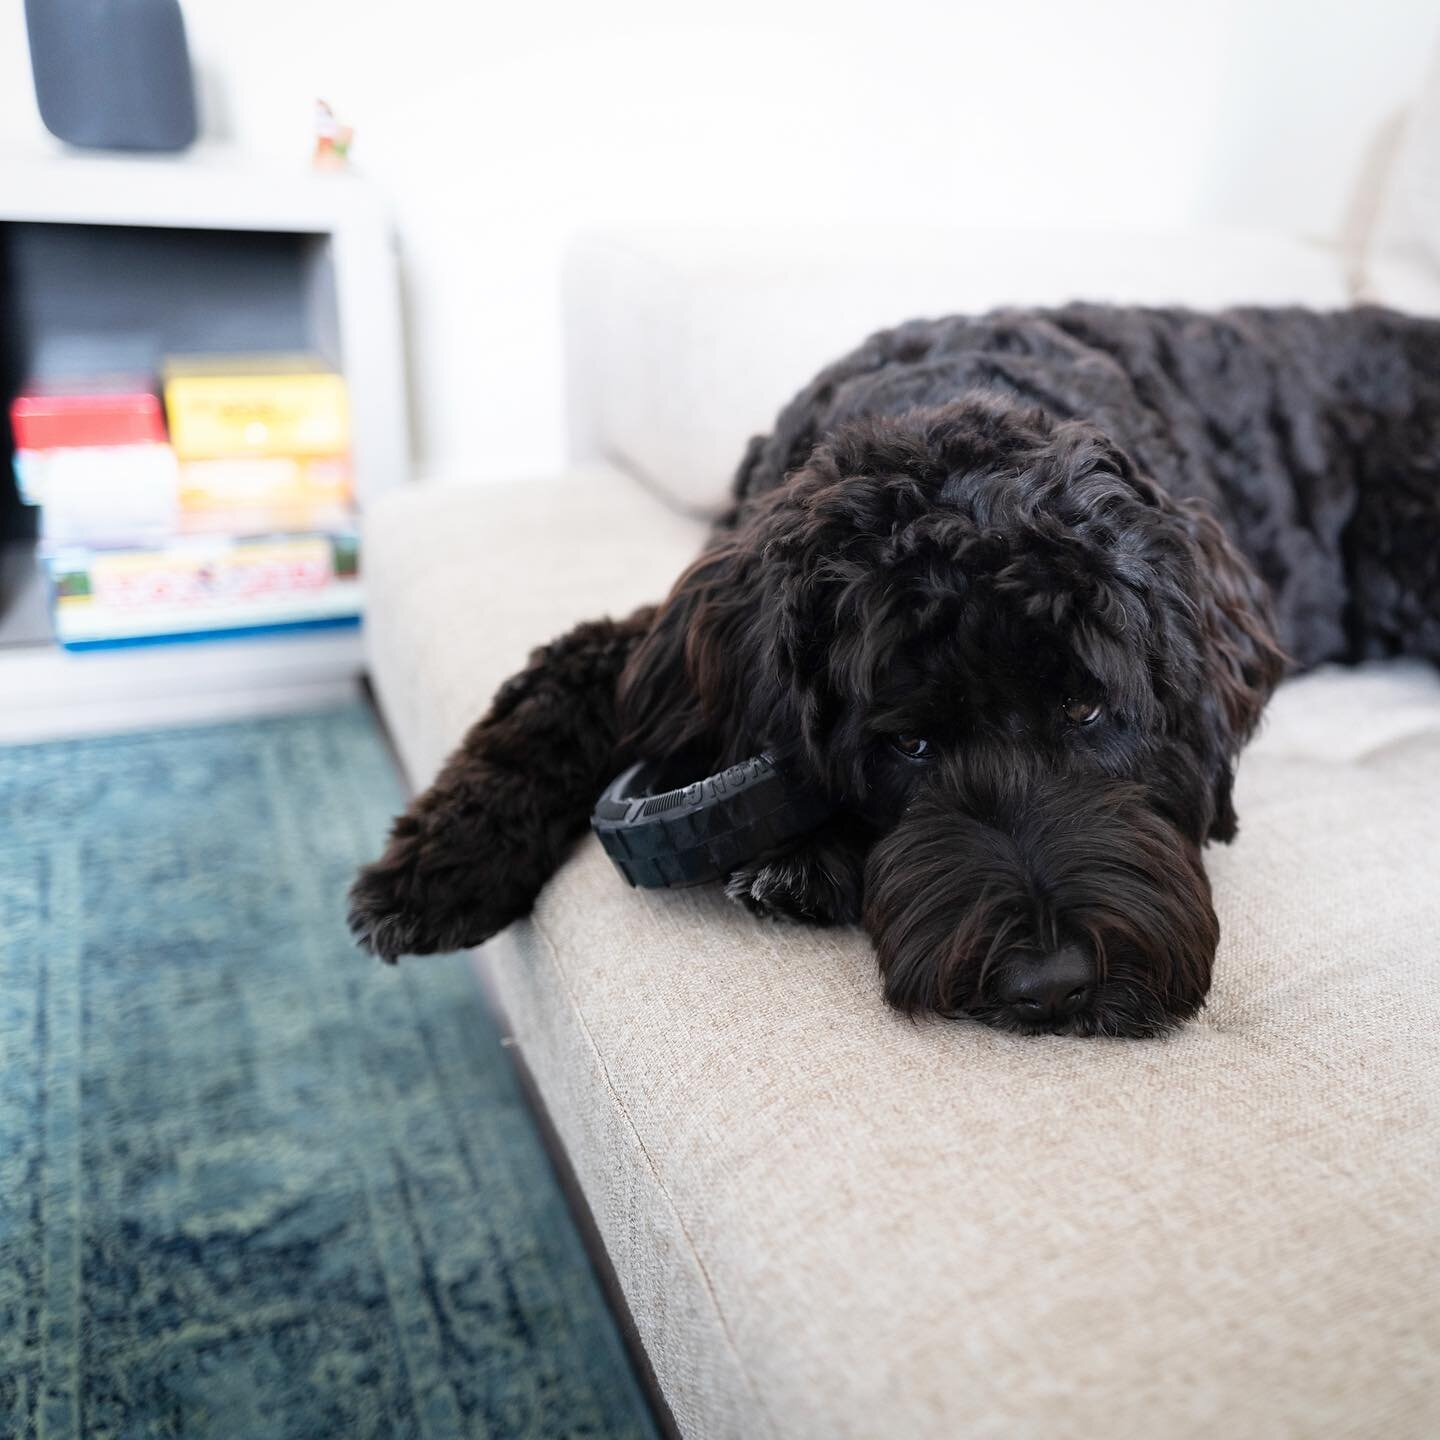 Today, like yesterday and tomorrow is a couch potato kind of day. 😴🥱
.
.
.
#toraqportuguesewaterdogs #happydog #fluffygirl #portugesewaterdog #pwdsofinstagram #pwd #waterdog #california #dogstagram #instadog #porties #leica #mugsytheportie #shotonl